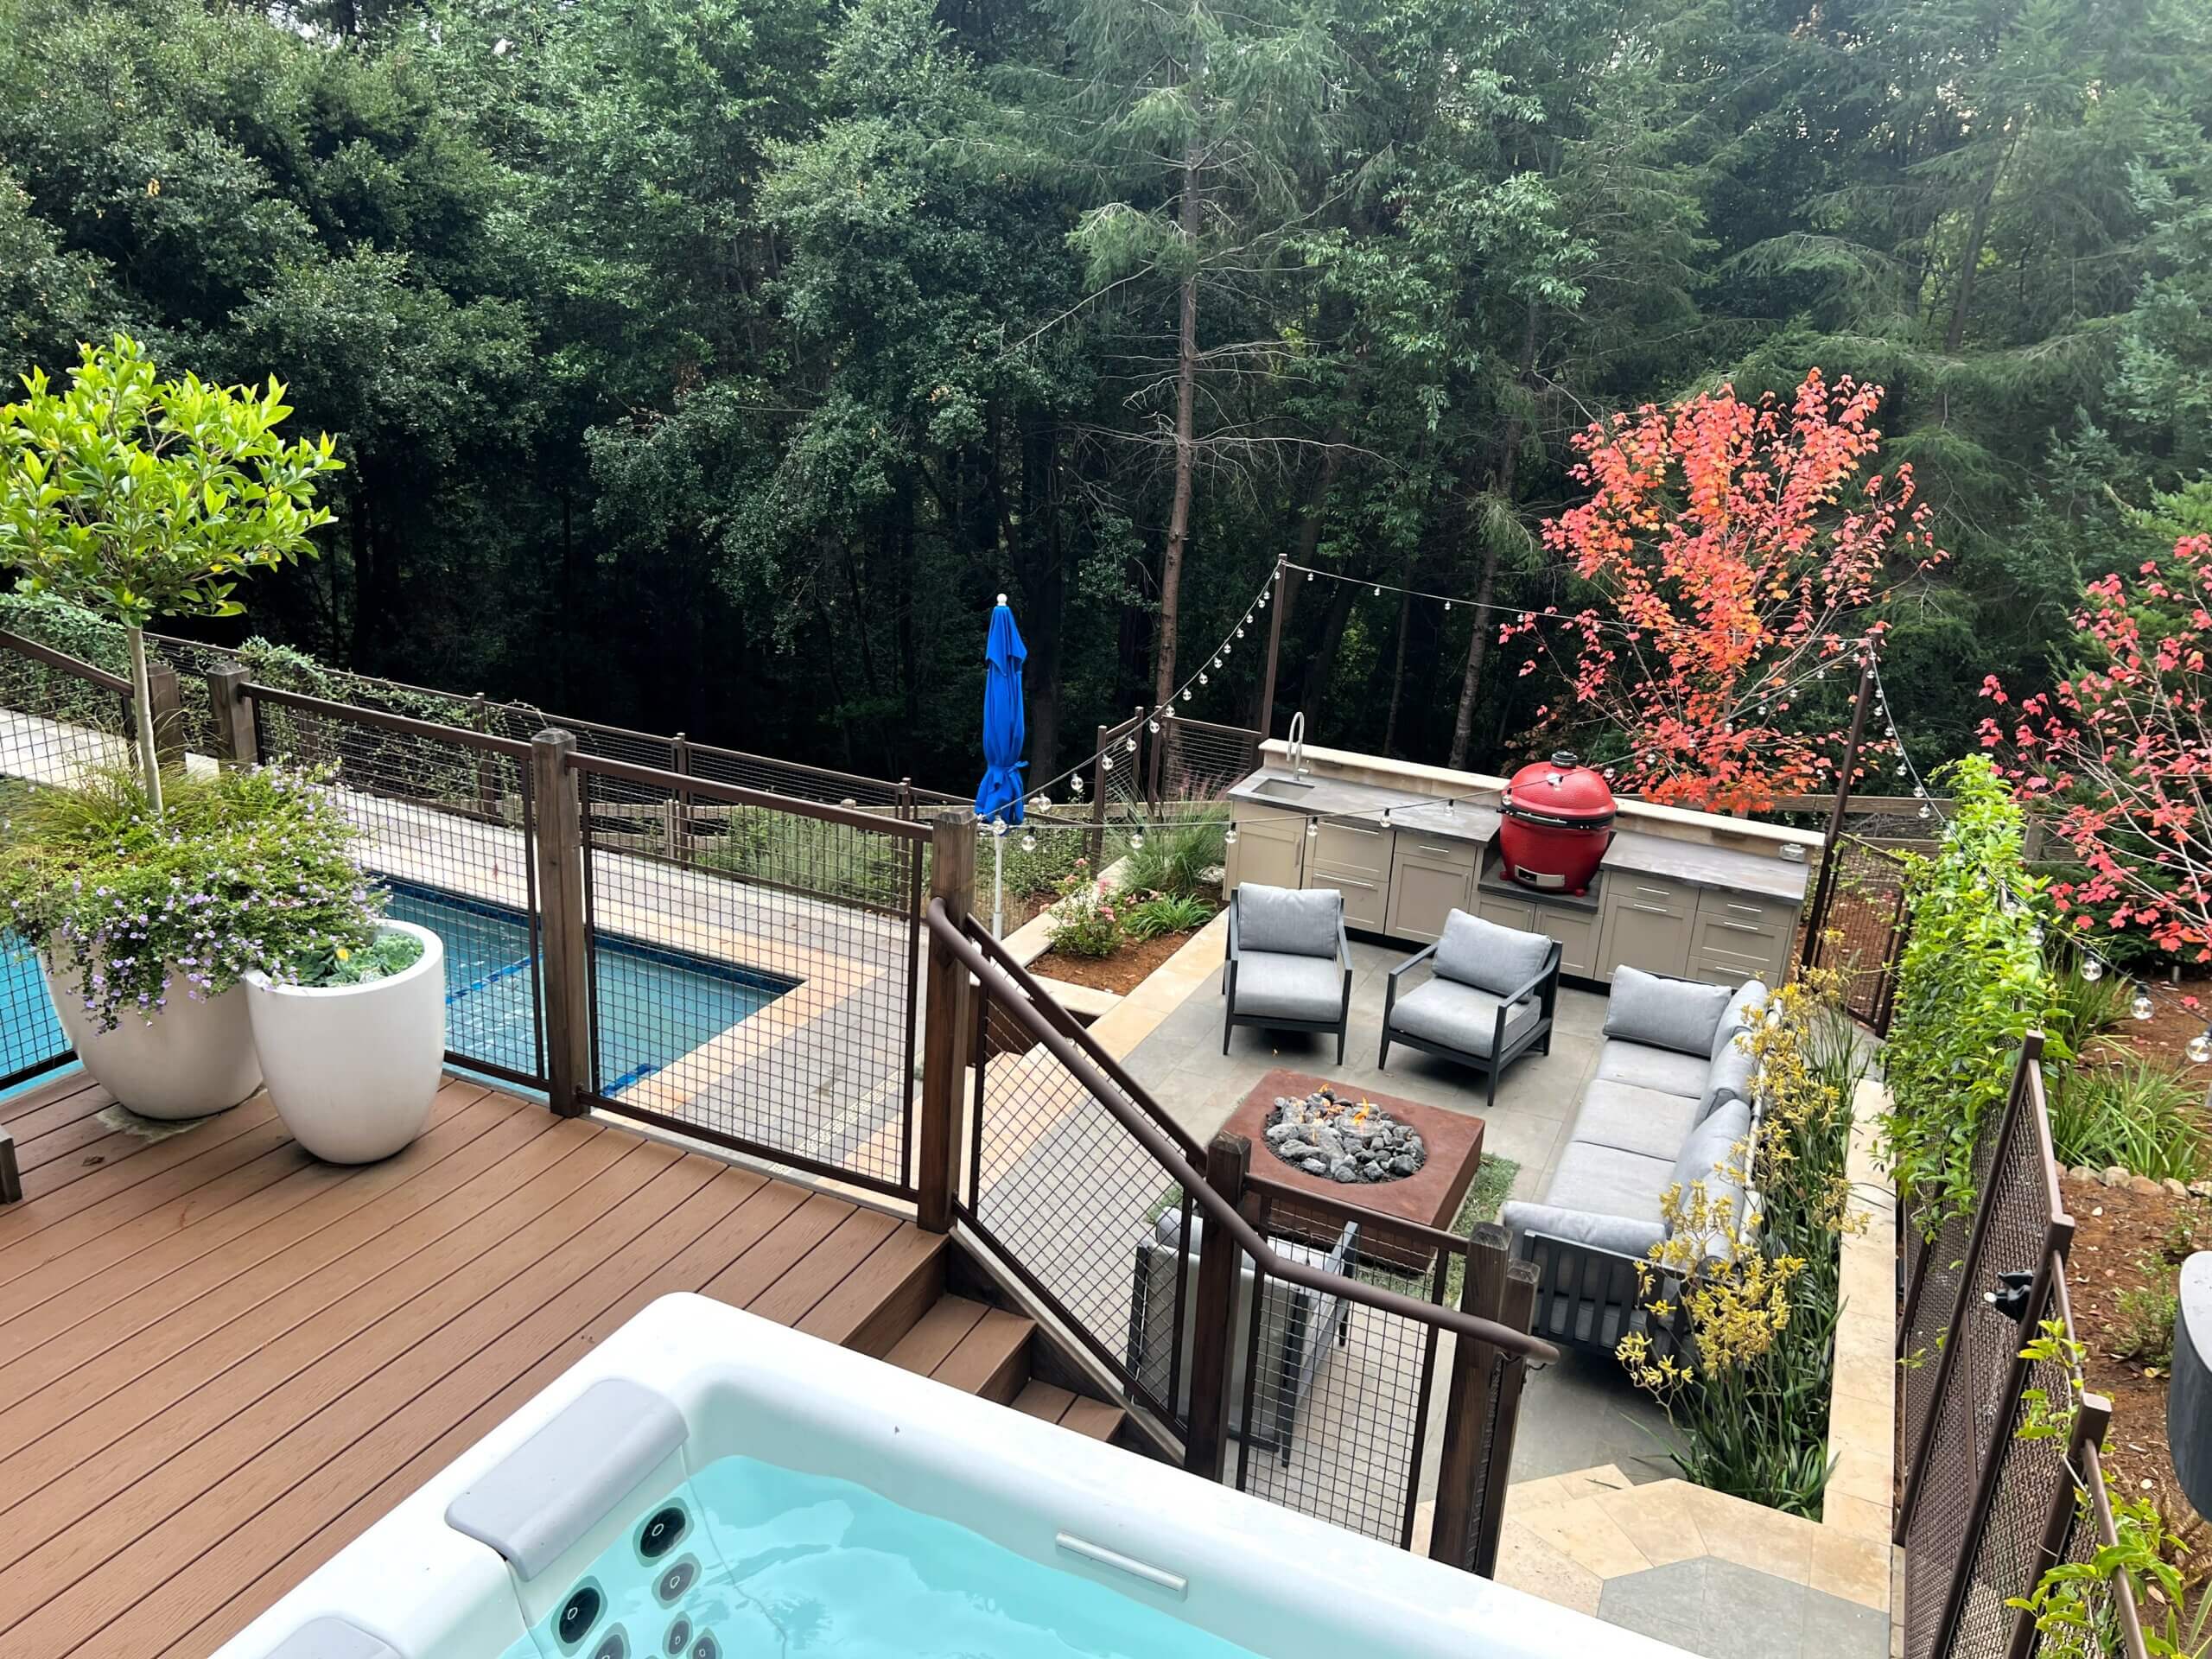 View of seating area from upper deck showing firepit, pool and hillside forest in background